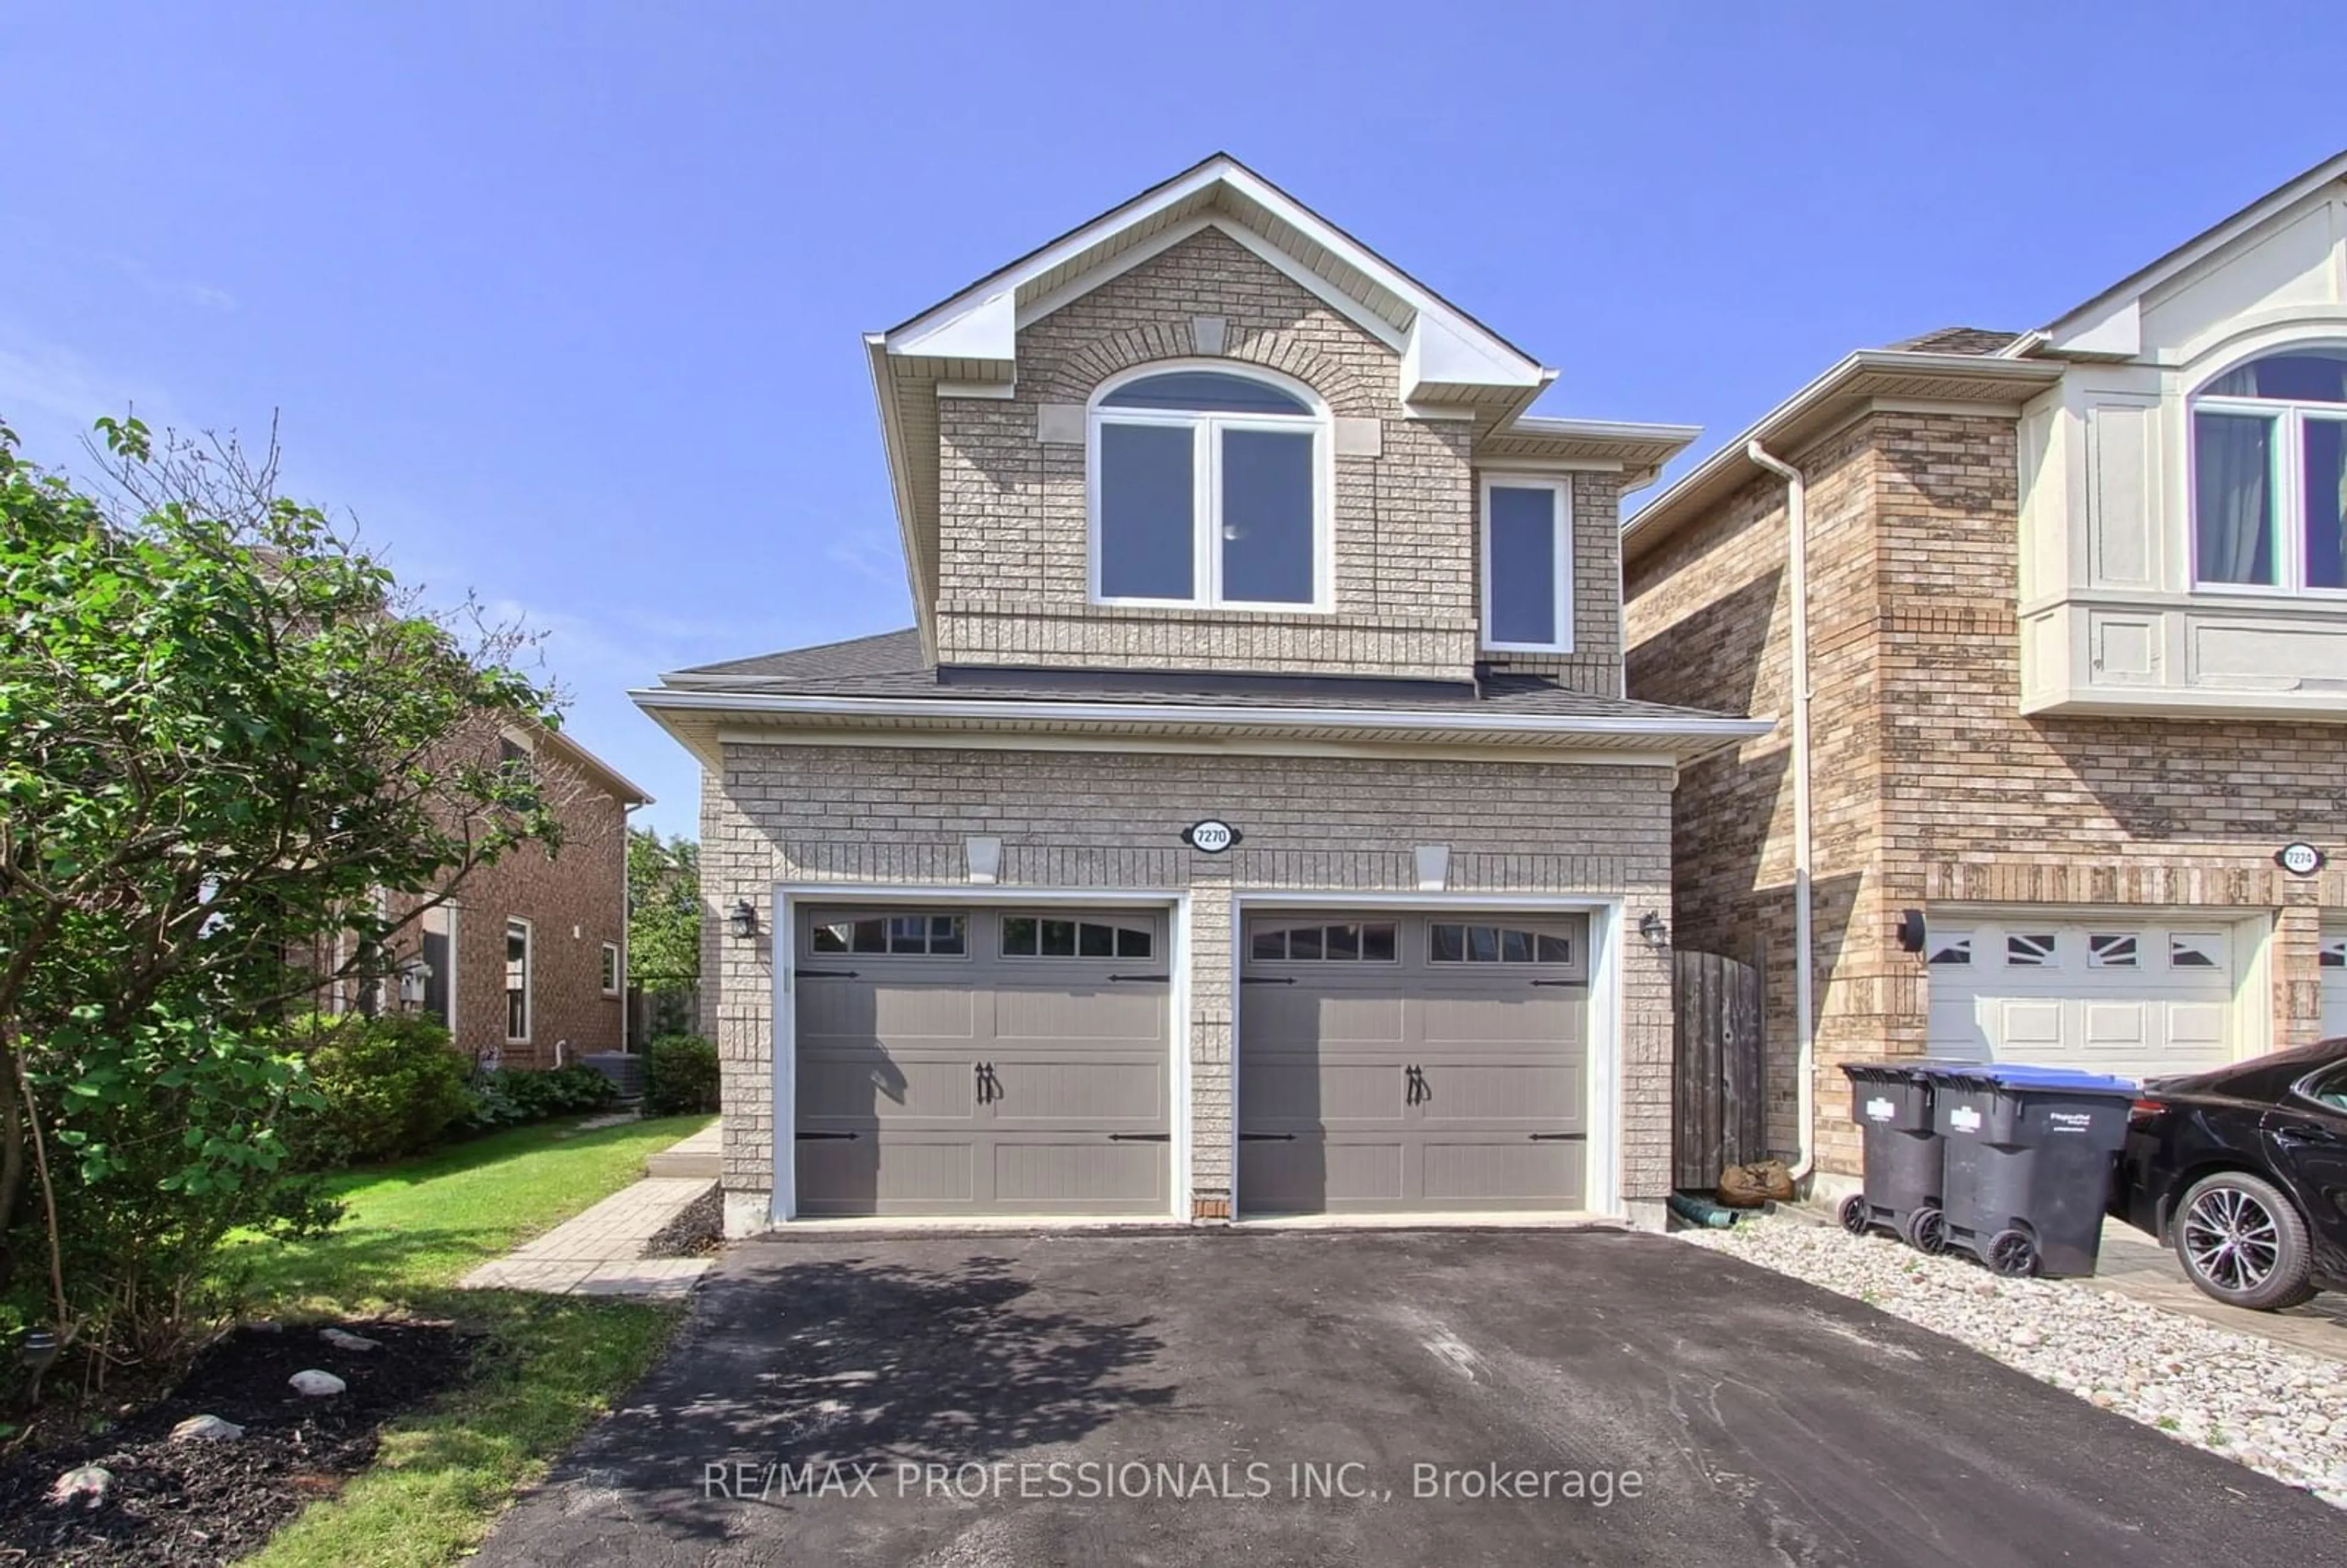 Home with brick exterior material for 7270 Blackwood Mews, Mississauga Ontario L5N 8G9